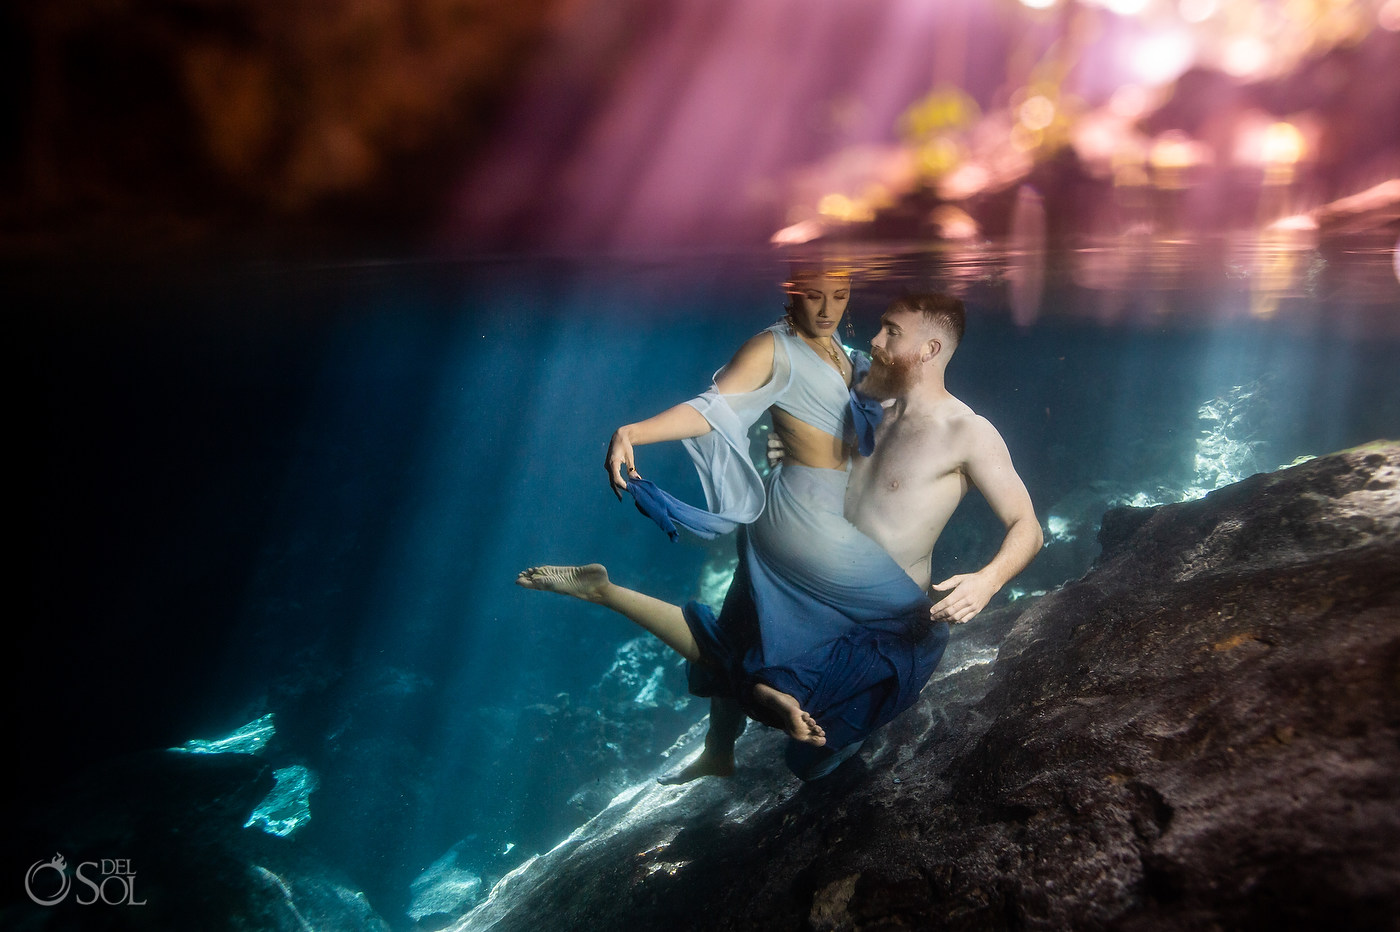 Underwater trash the dress micro cenote ceremony experience by del Sol Photography